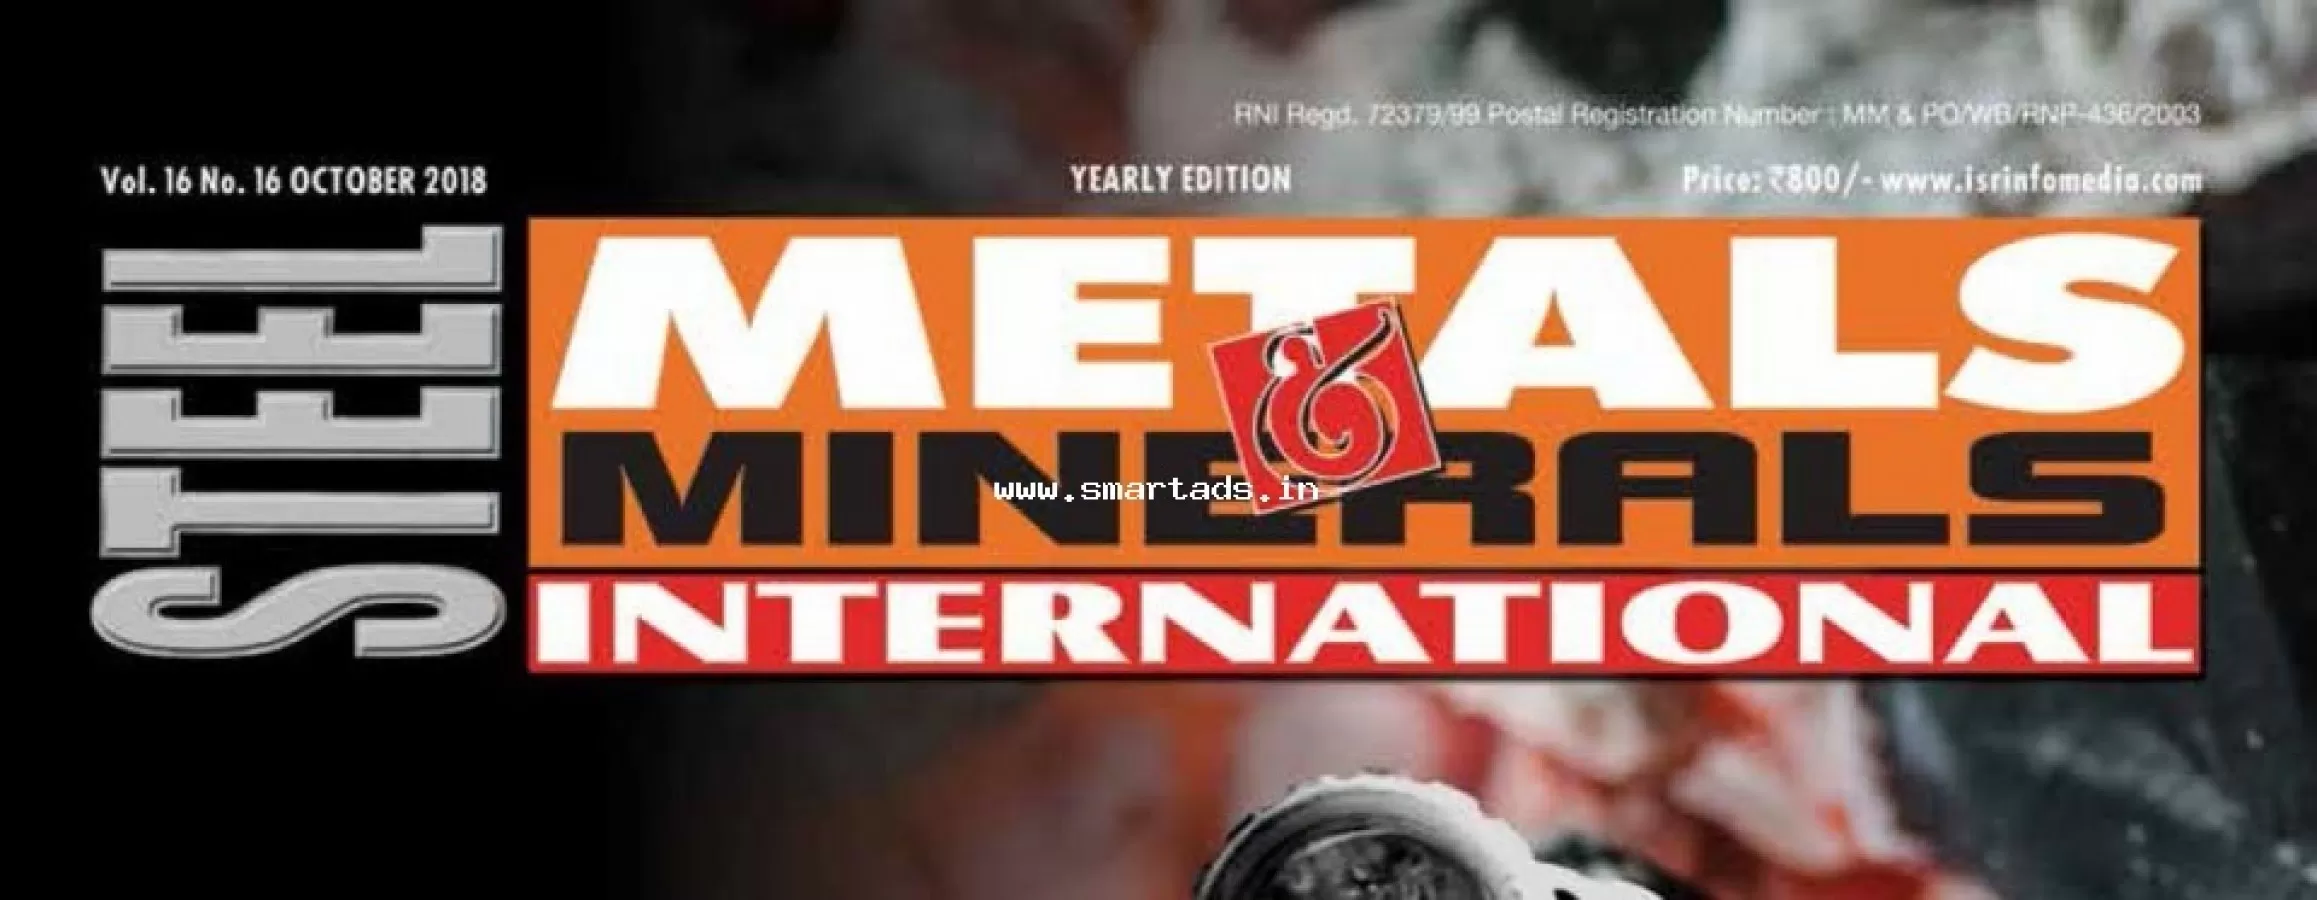 Magazine Media Steel Metals And Minerals International Advertising in India